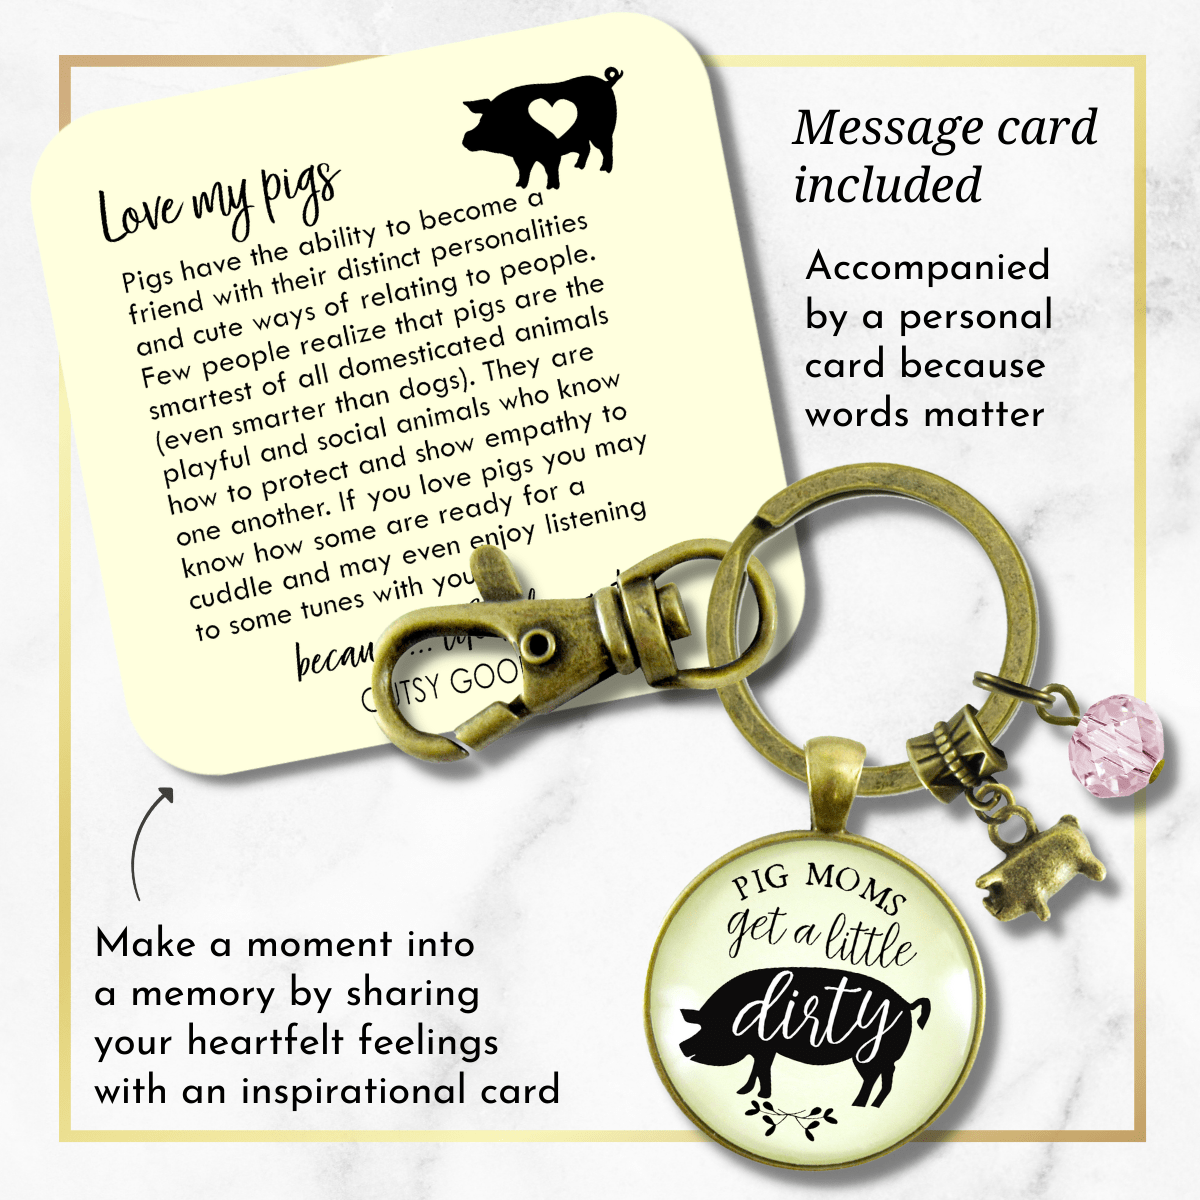 Pig Keychain Quote Pig Moms Get Dirty Sassy Country Girl Jewelry - Gutsy Goodness Handmade Jewelry;Pig Keychain Quote Pig Moms Get Dirty Sassy Country Girl Jewelry - Gutsy Goodness Handmade Jewelry Gifts